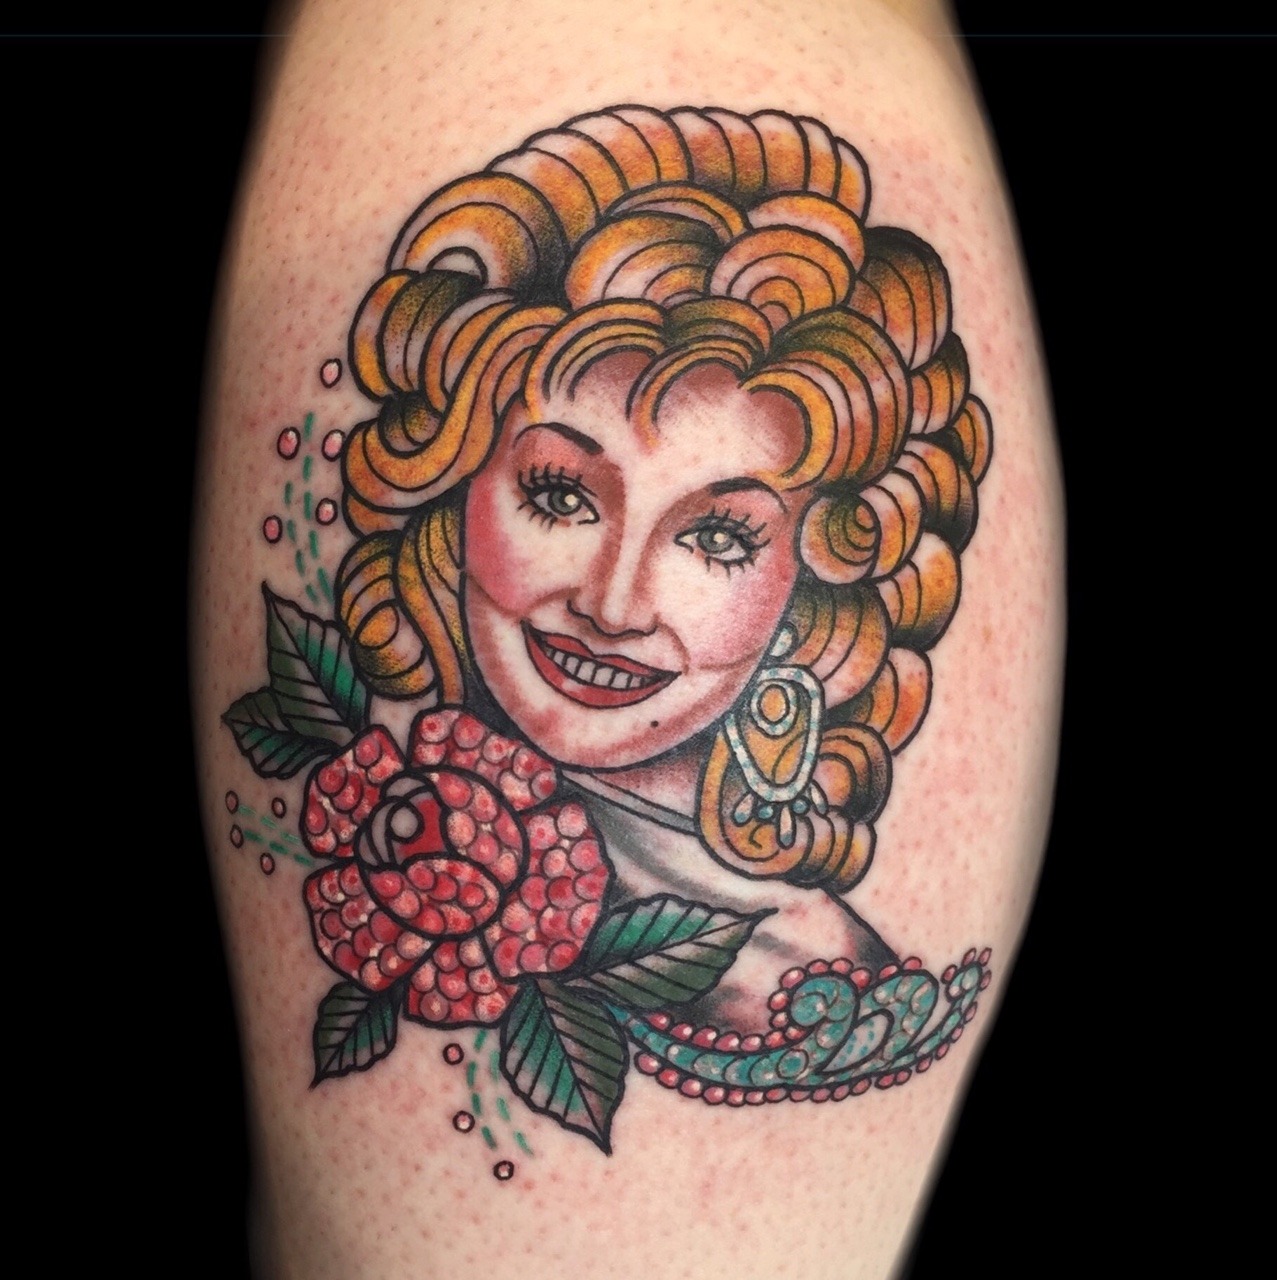 Dolly Parton reveals the truth about her little tattoos